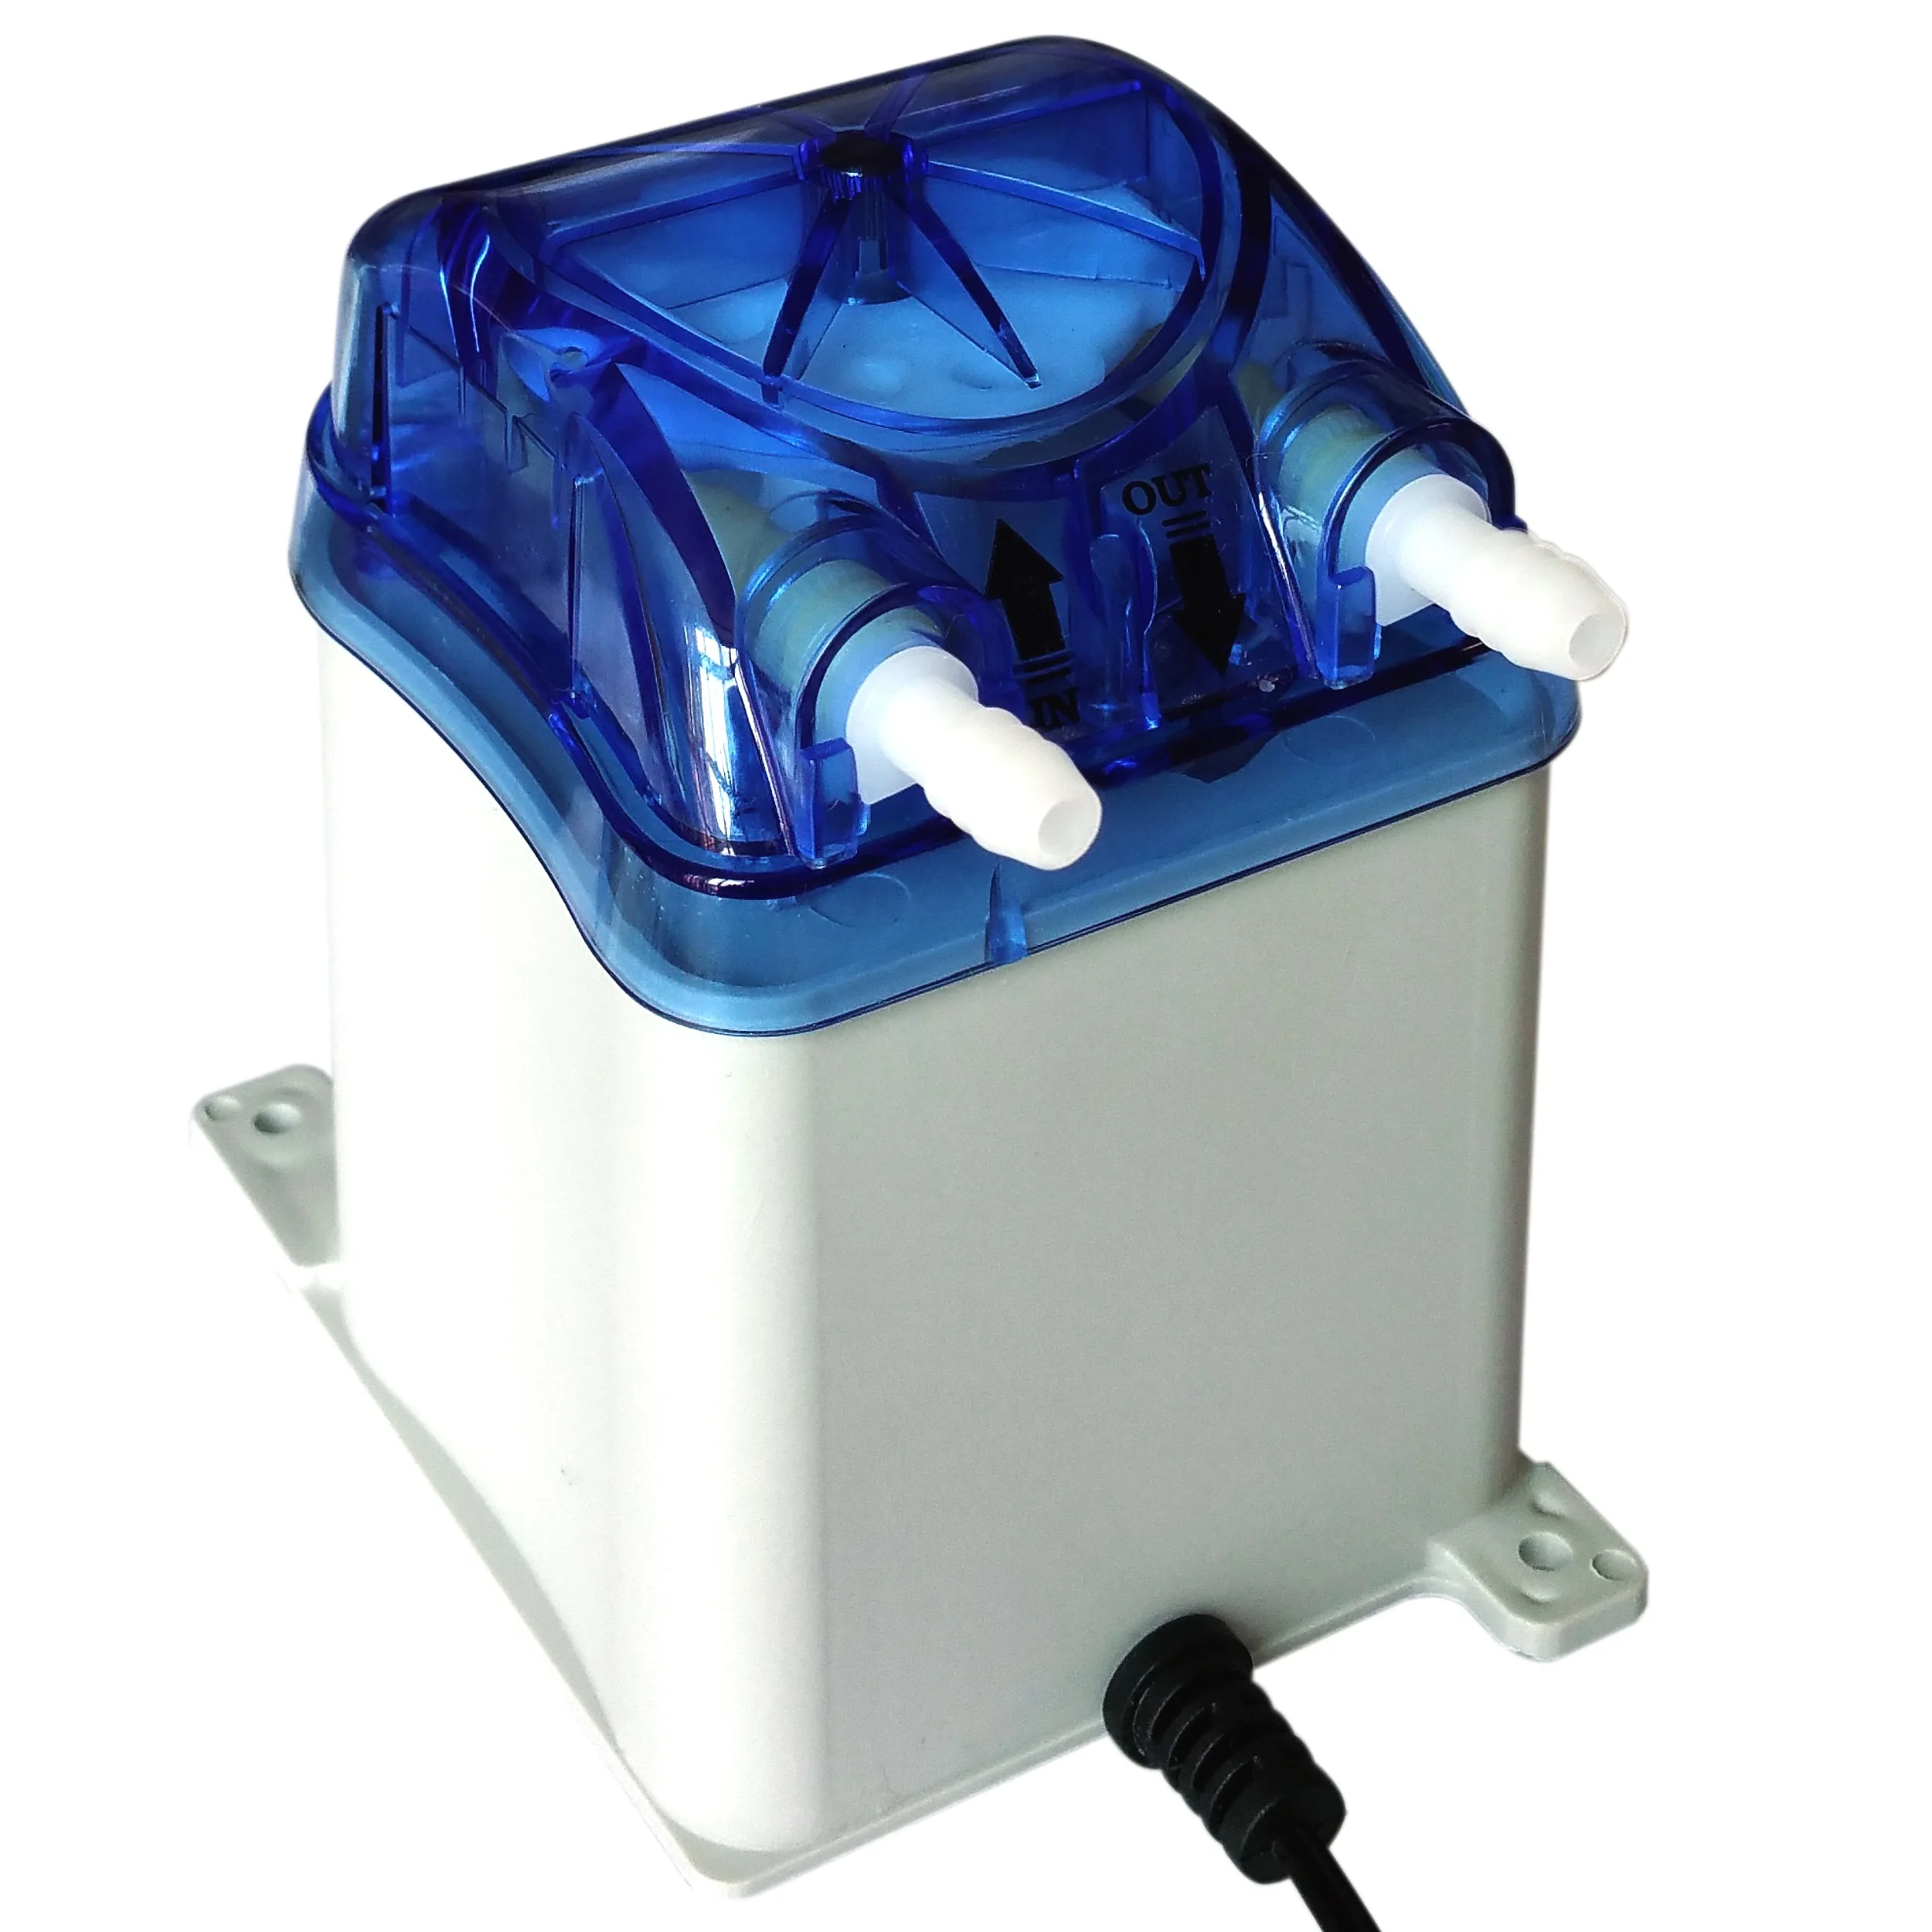 

250ml/min, 2 Rollers, Honlite 24V Peristaltic Pump with Exchangeable Pump Head and PharMed BPT Peristaltic Tube